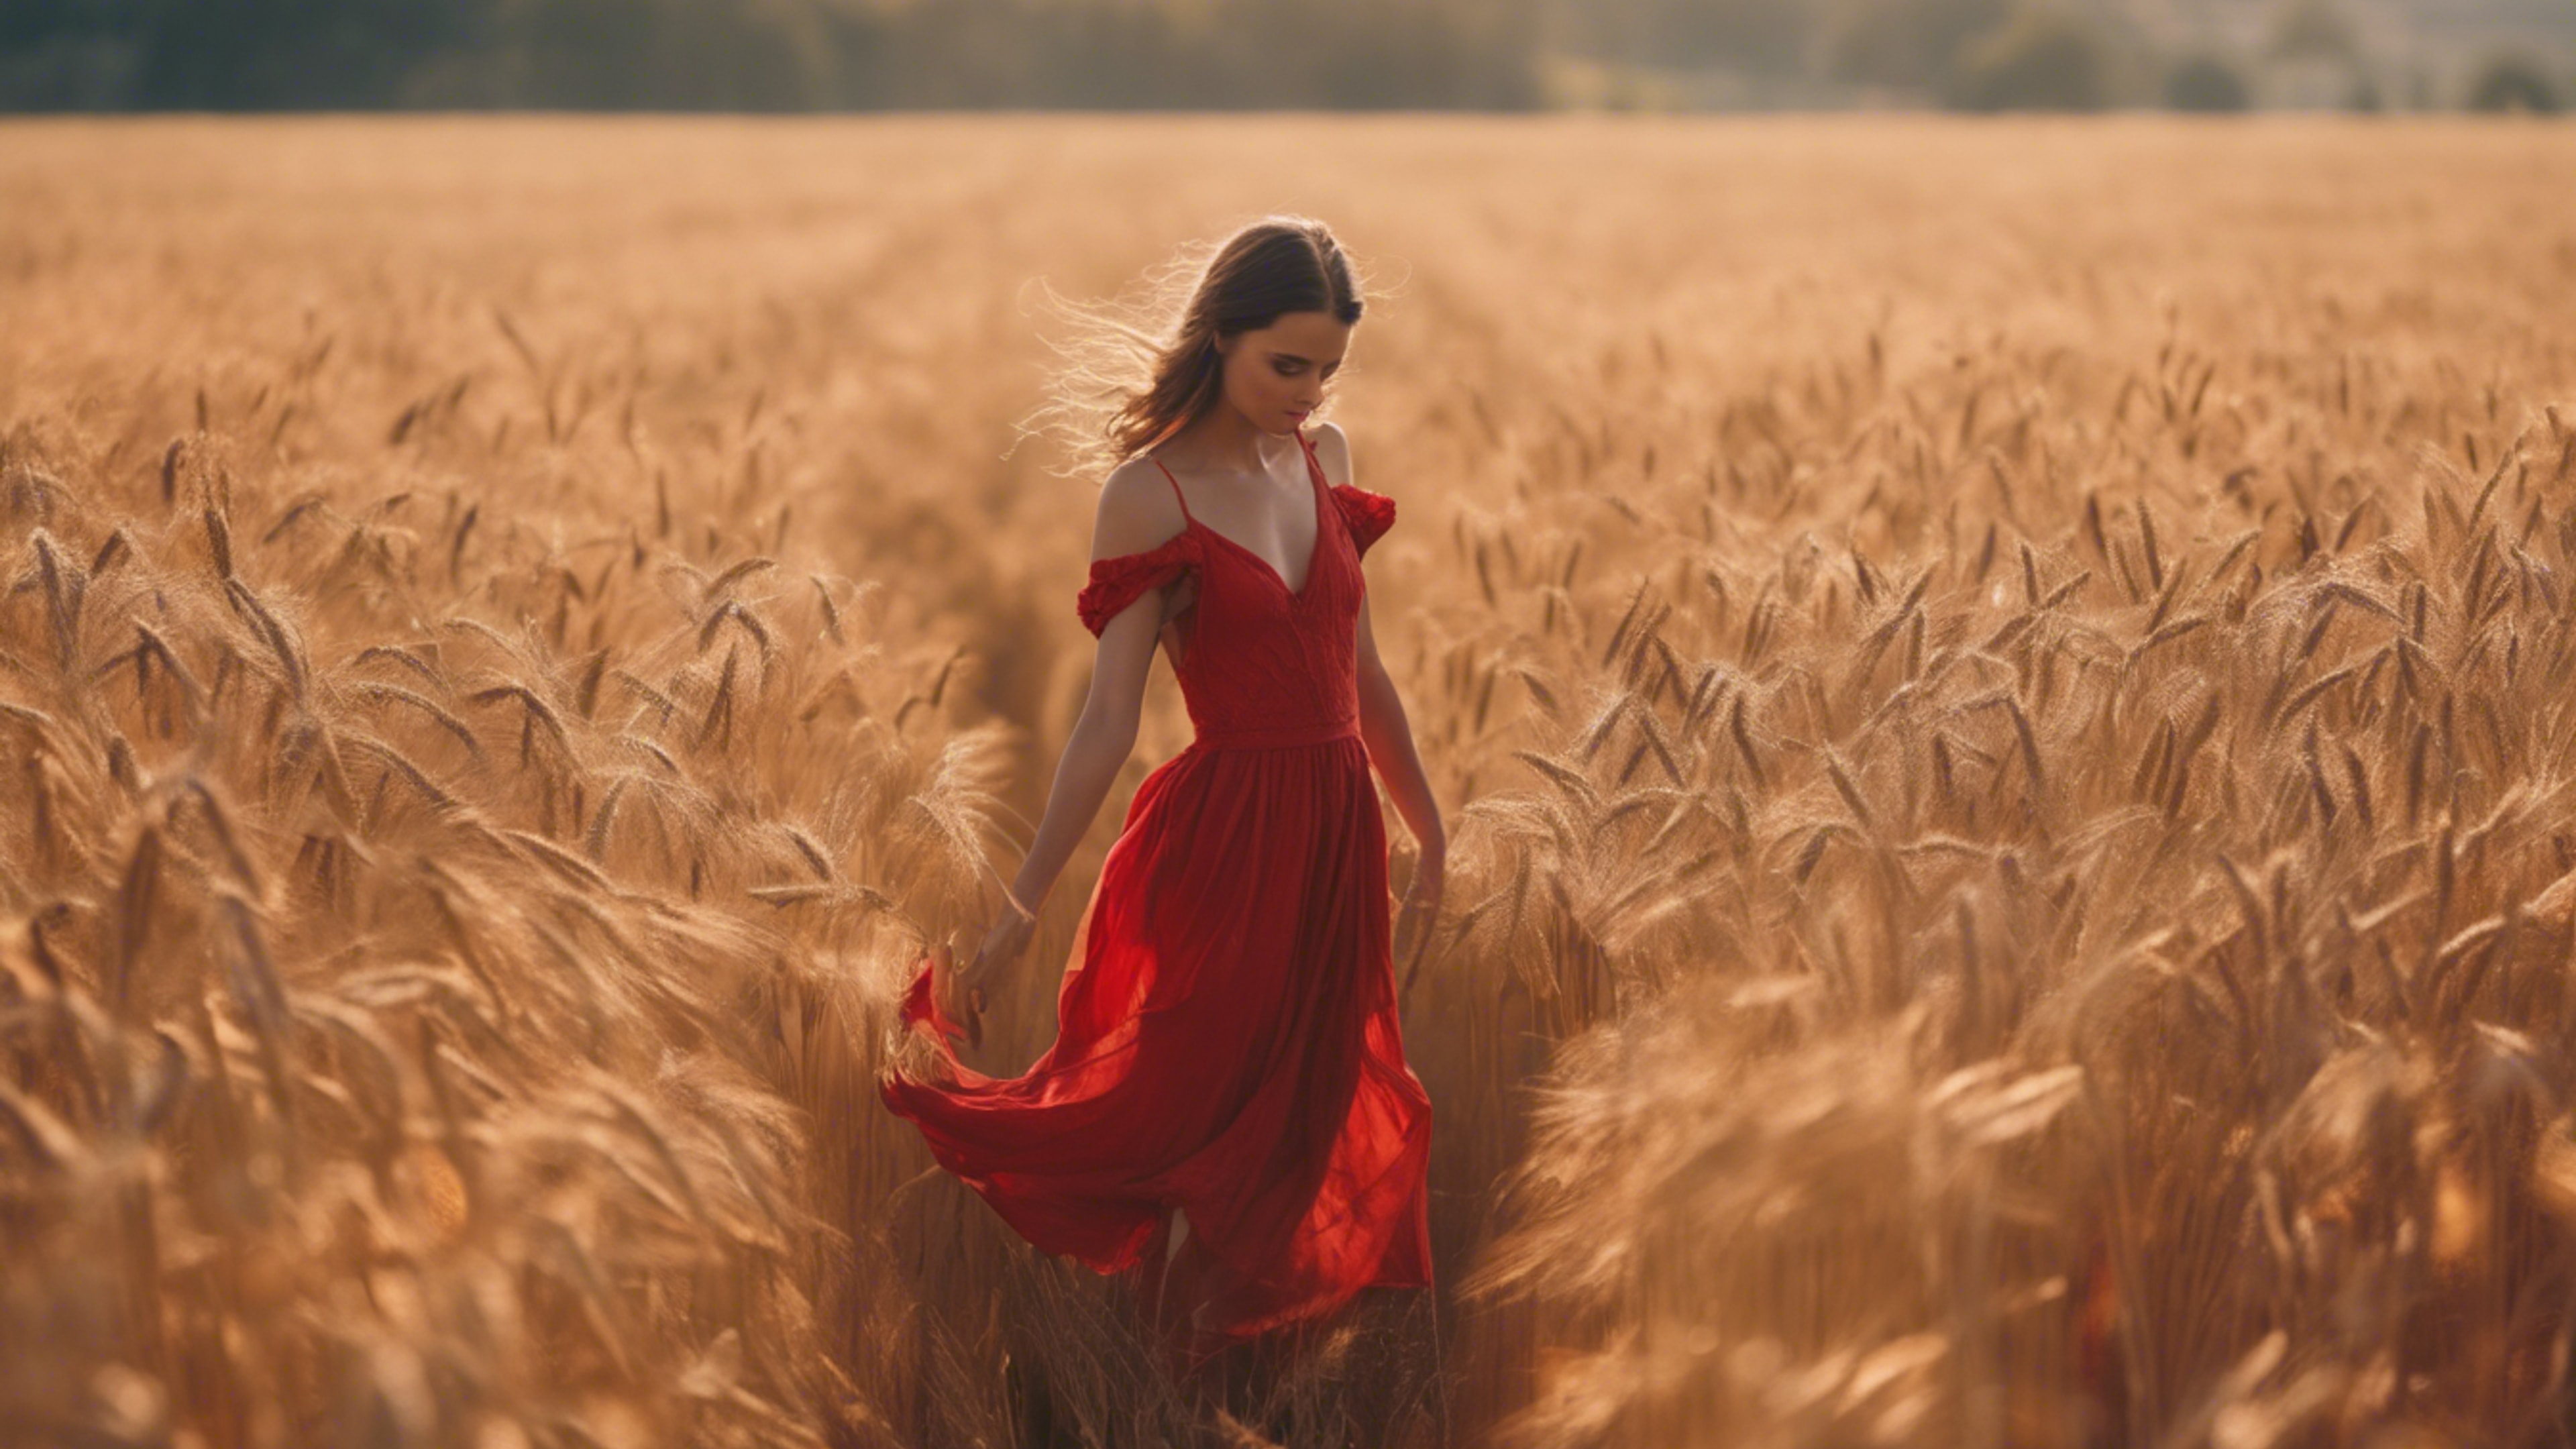 A young girl in a fiery red dress dancing in a golden wheat field. Обои[3d2bbc59672c41dea075]